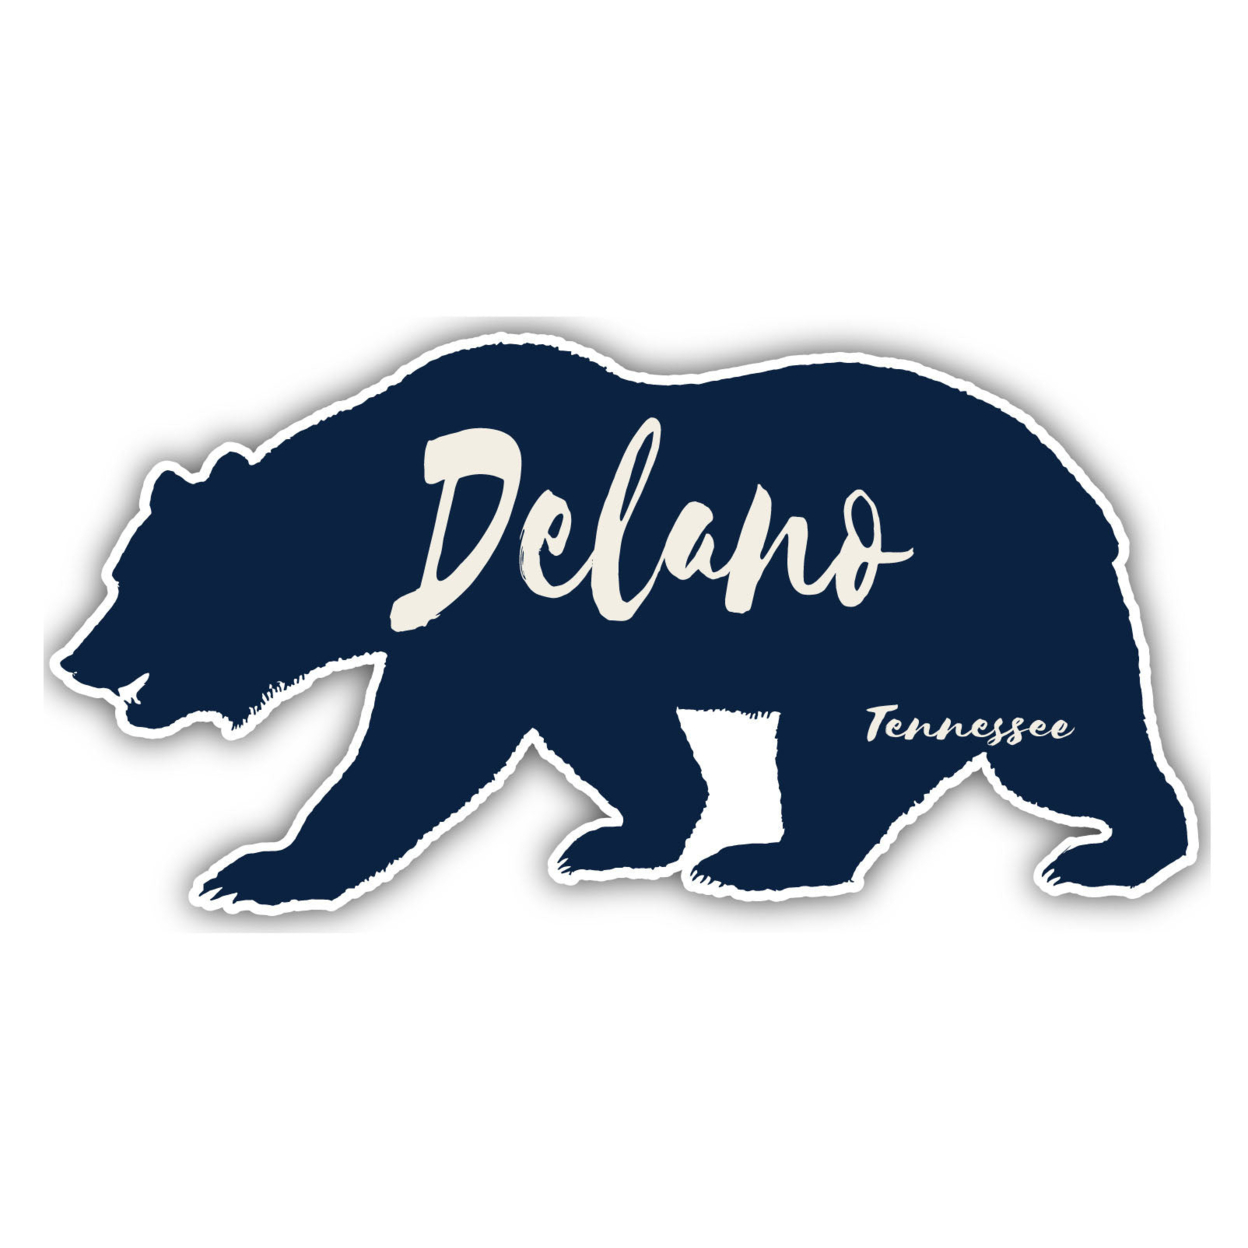 Delano Tennessee Souvenir Decorative Stickers (Choose Theme And Size) - 4-Pack, 12-Inch, Bear